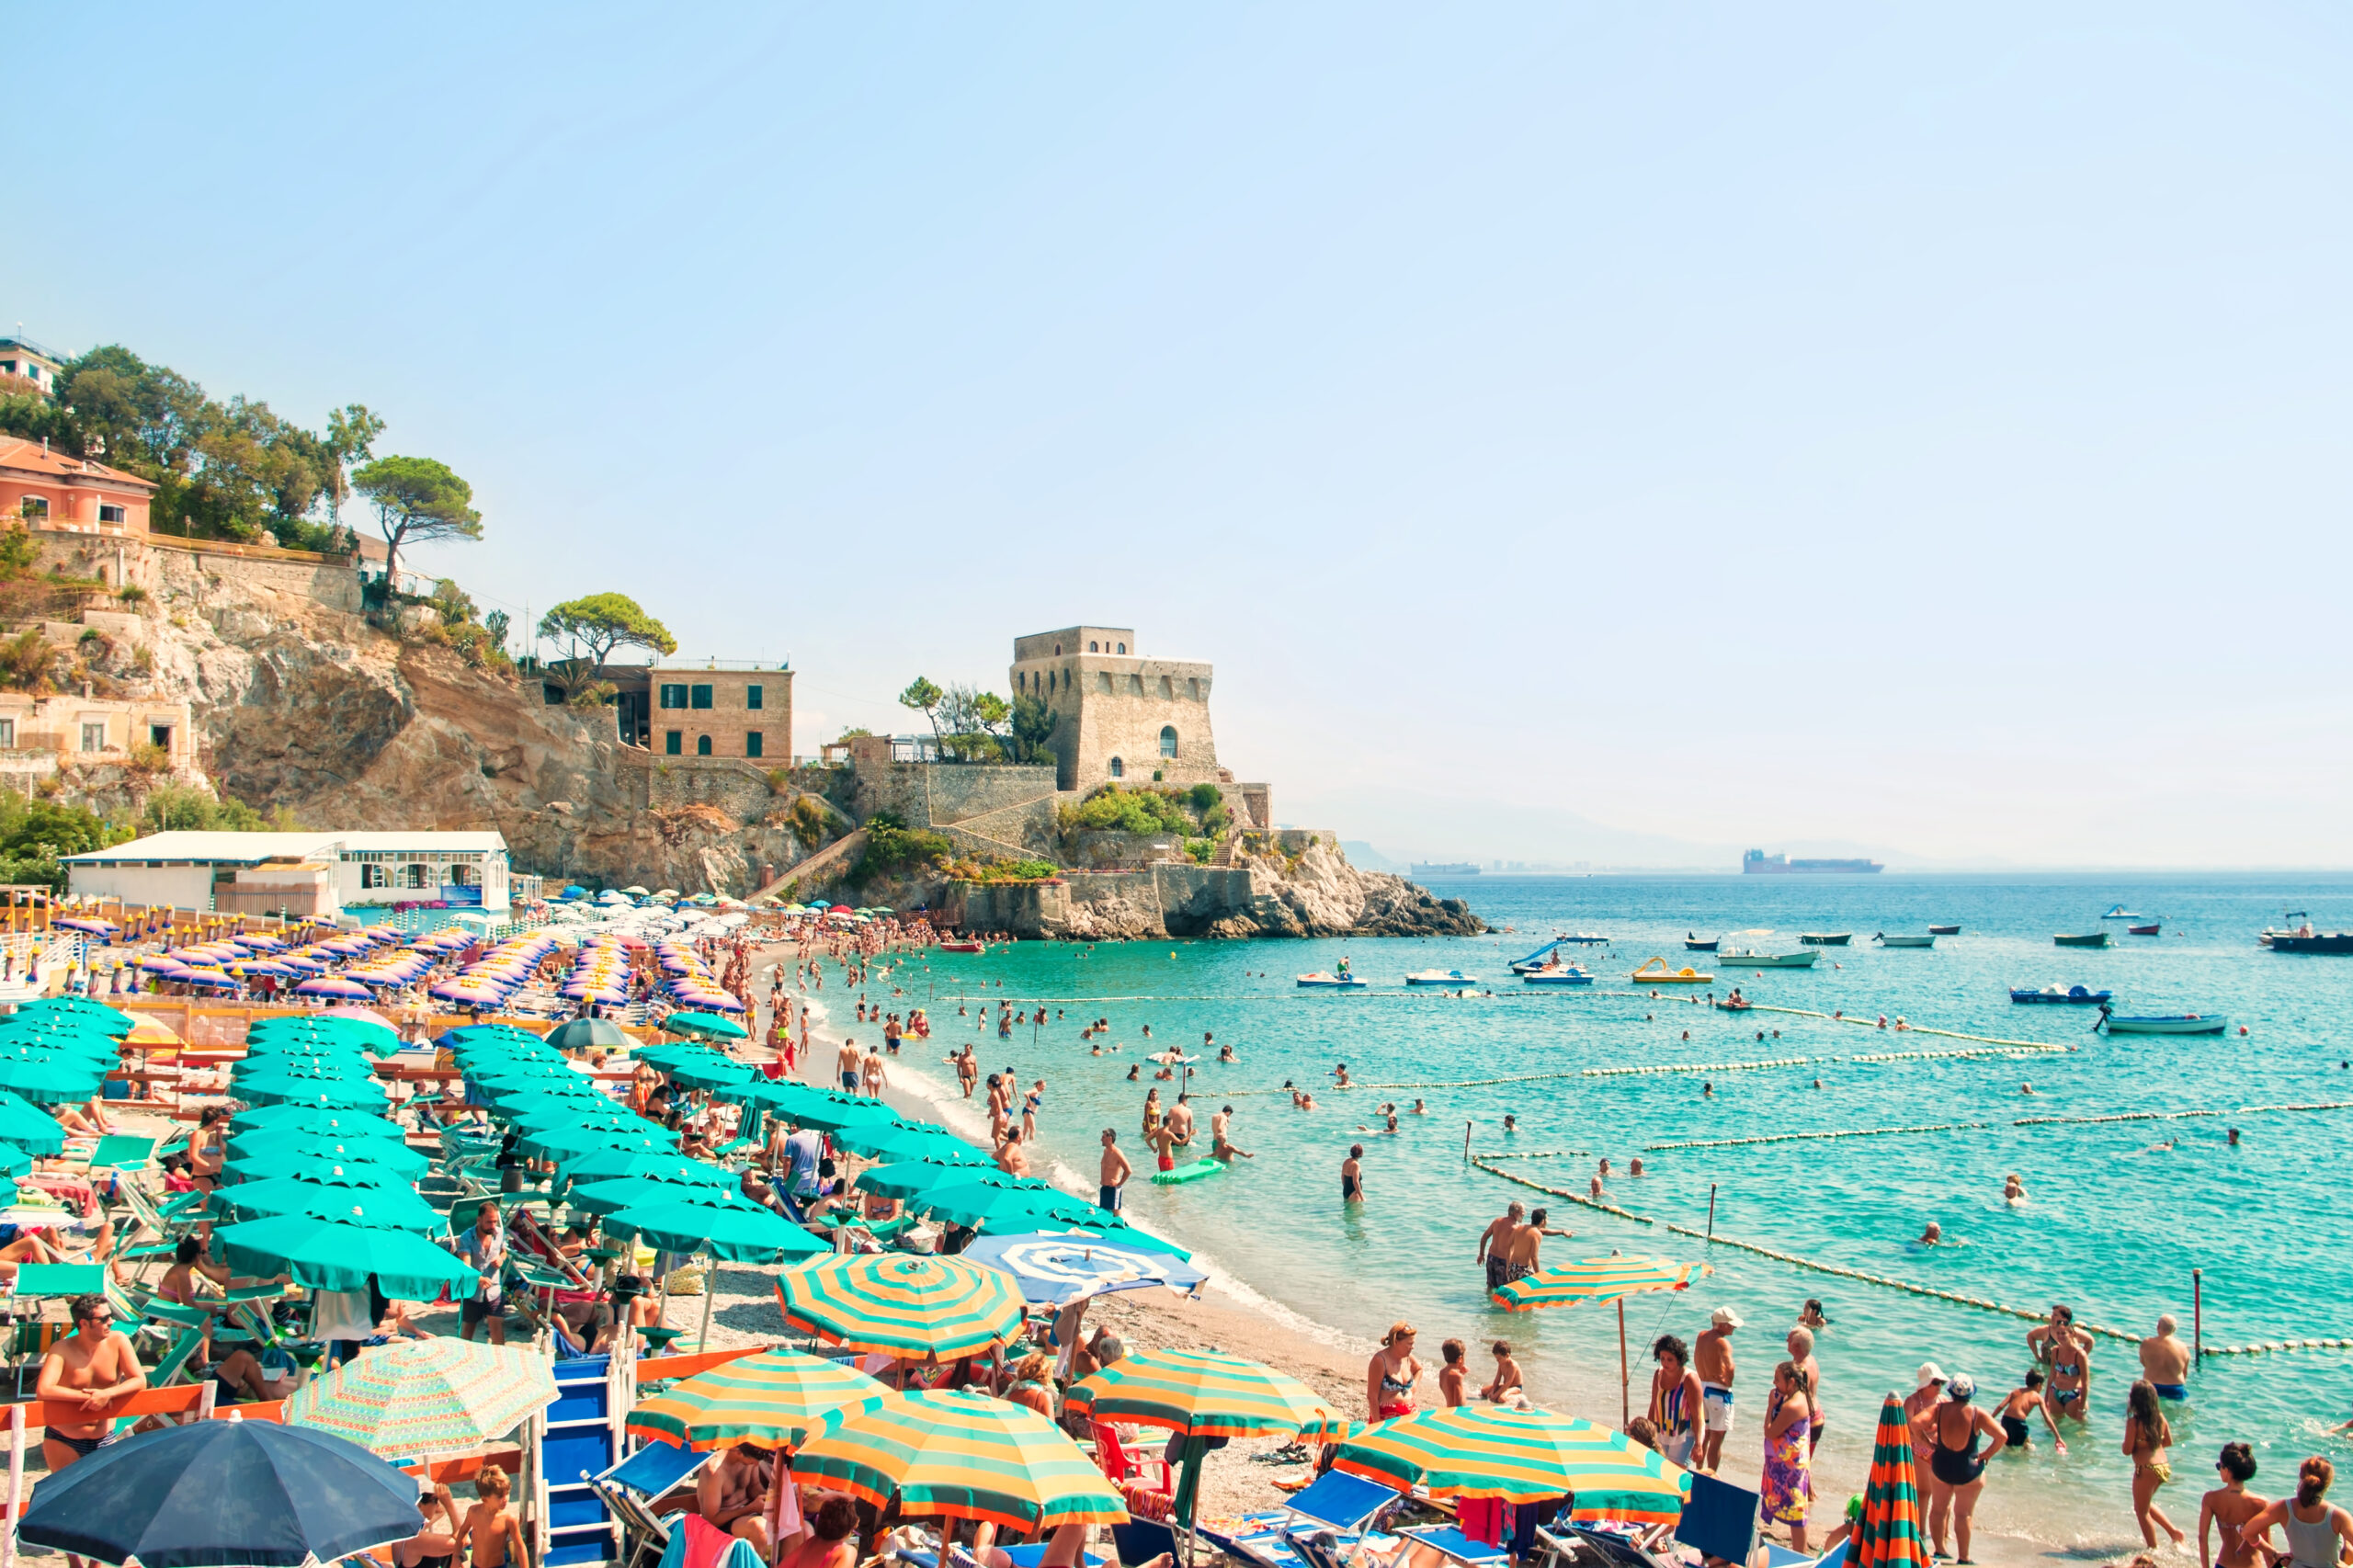 Photo of Erchie beach showing people sunbathing in aqua water with a stone tower in the background.